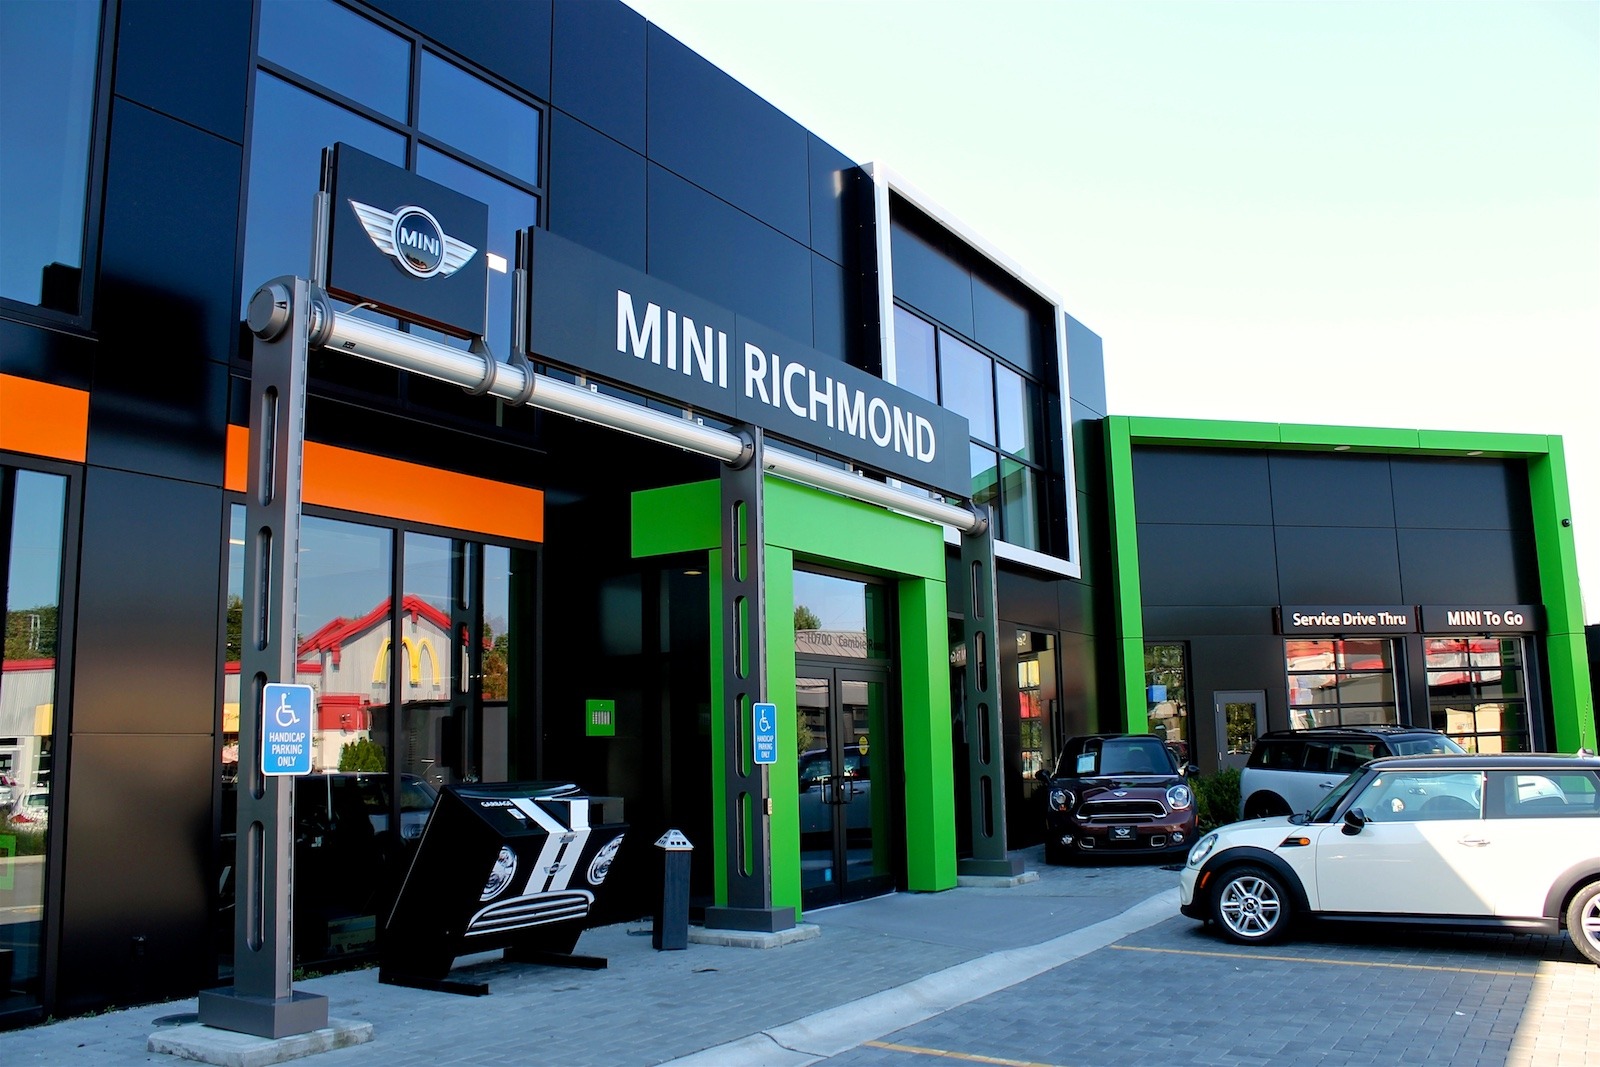 Robertson-Walls-Ceilings-Completed-Projects-Luxury-Car-Dealerships-Mini-Richmond-4 MINI RICHMOND